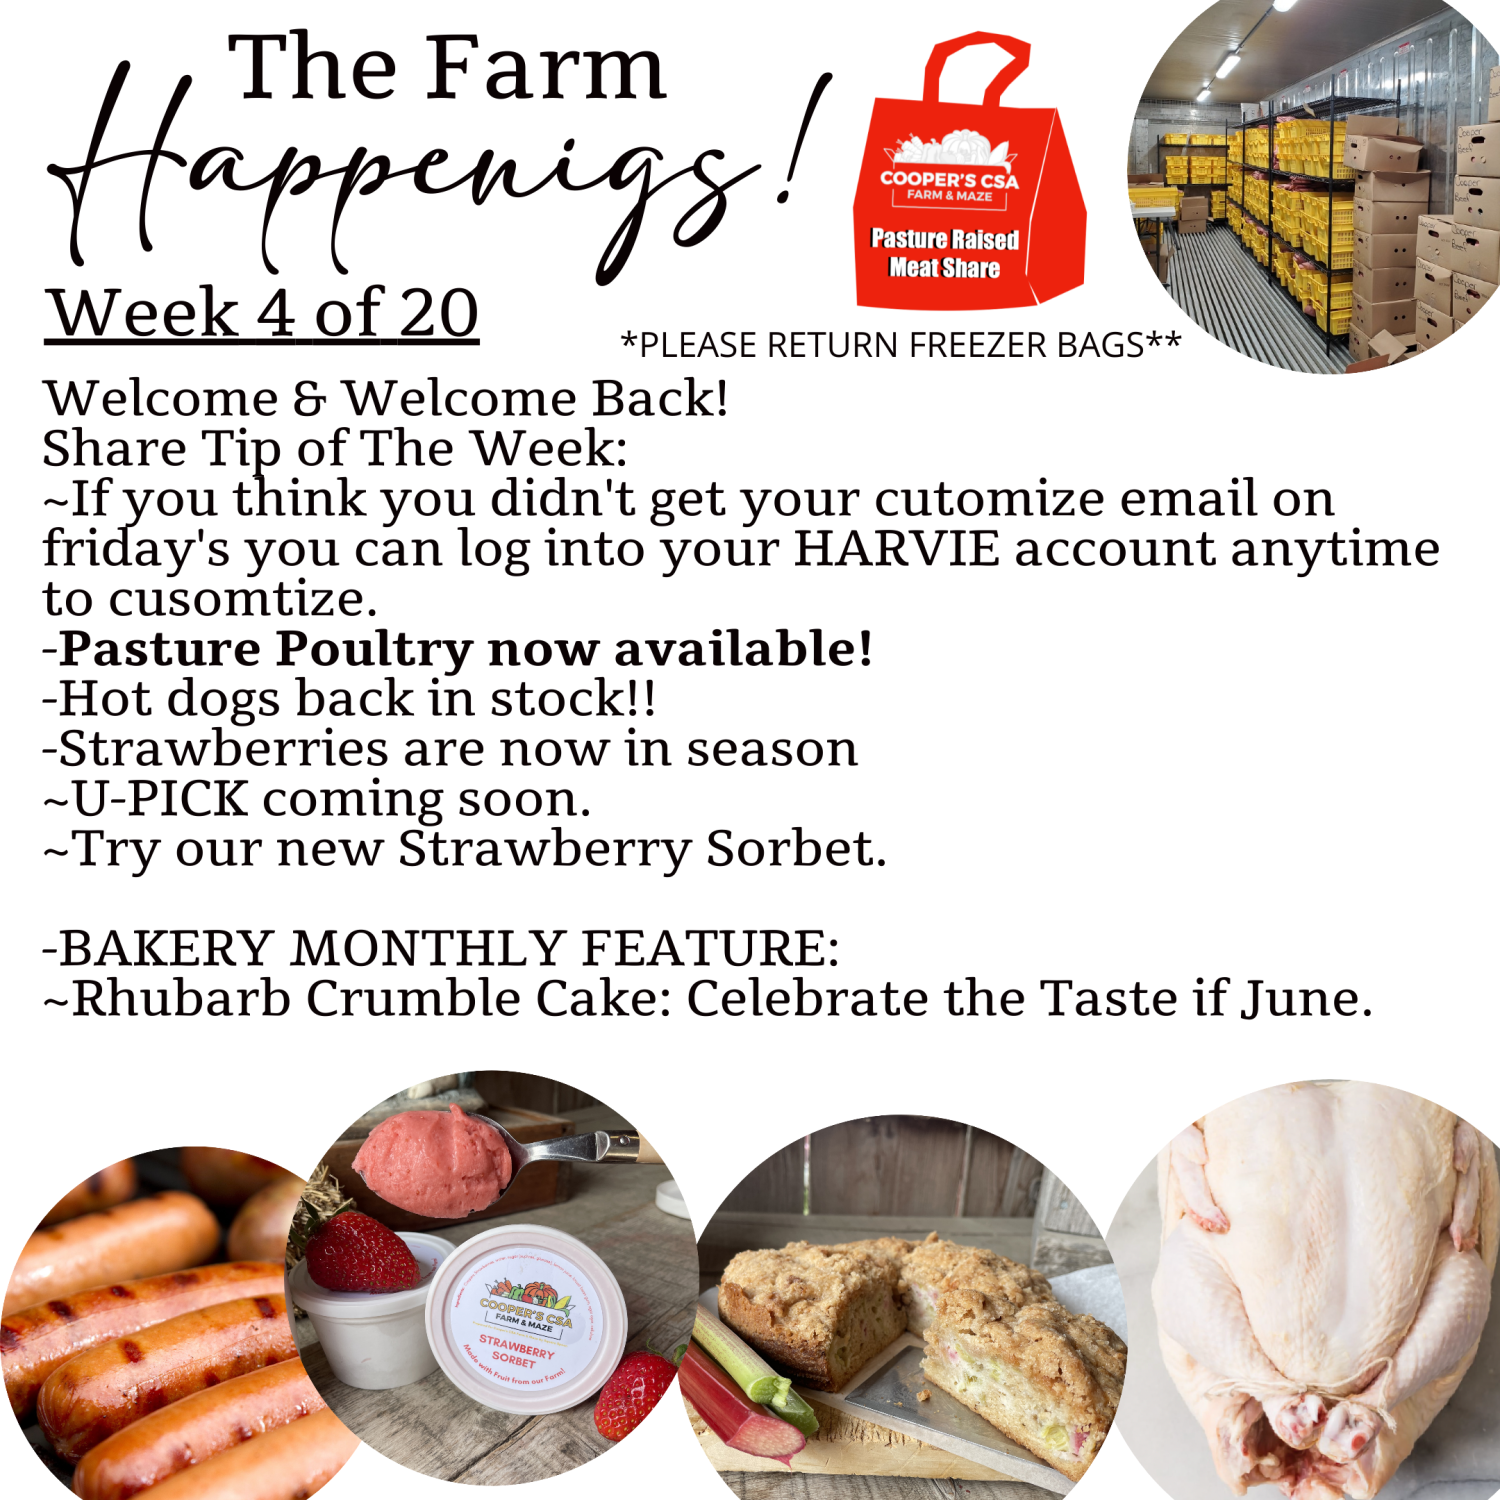 "Pasture Meat Shares"-Coopers CSA Farm Farm Happenings Week 4 of 20